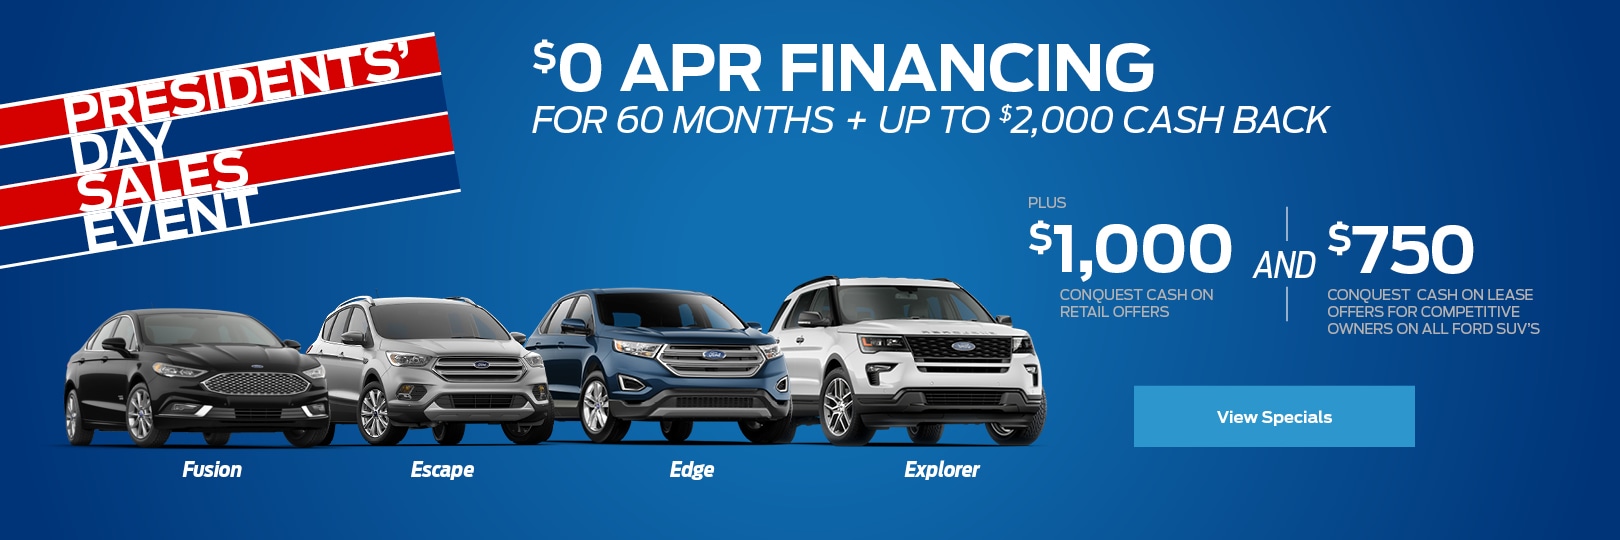 New & Used Ford Cars | Manderbach Ford | Ford Dealer Near Me